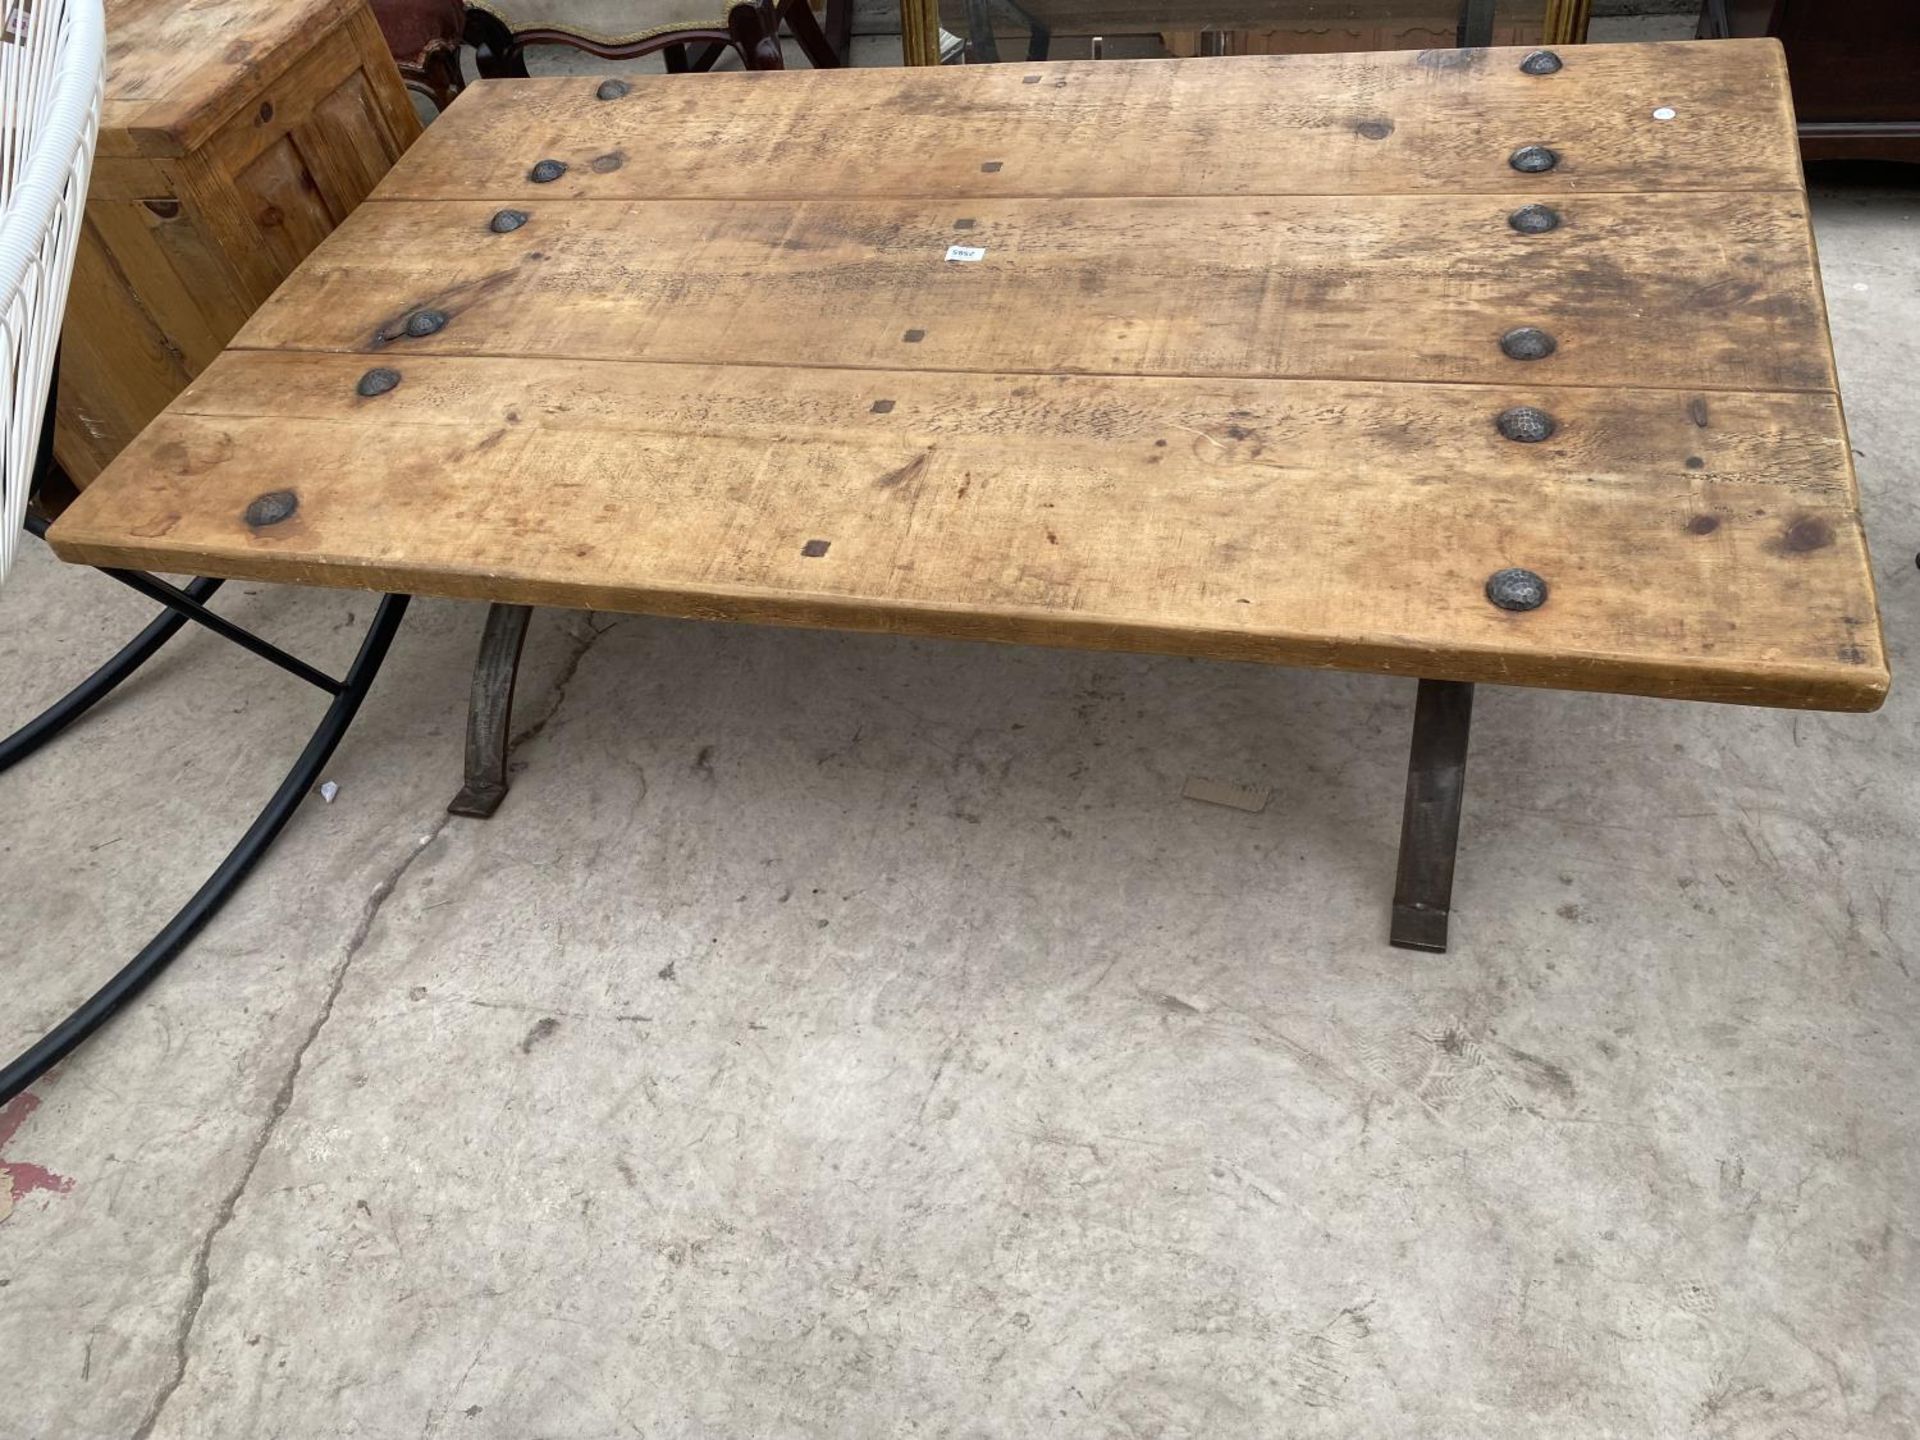 A RUSTIC THREE PLANK LOW TABLE ON METALWARE BASE WITH TWELVE STUDS, 60X35"